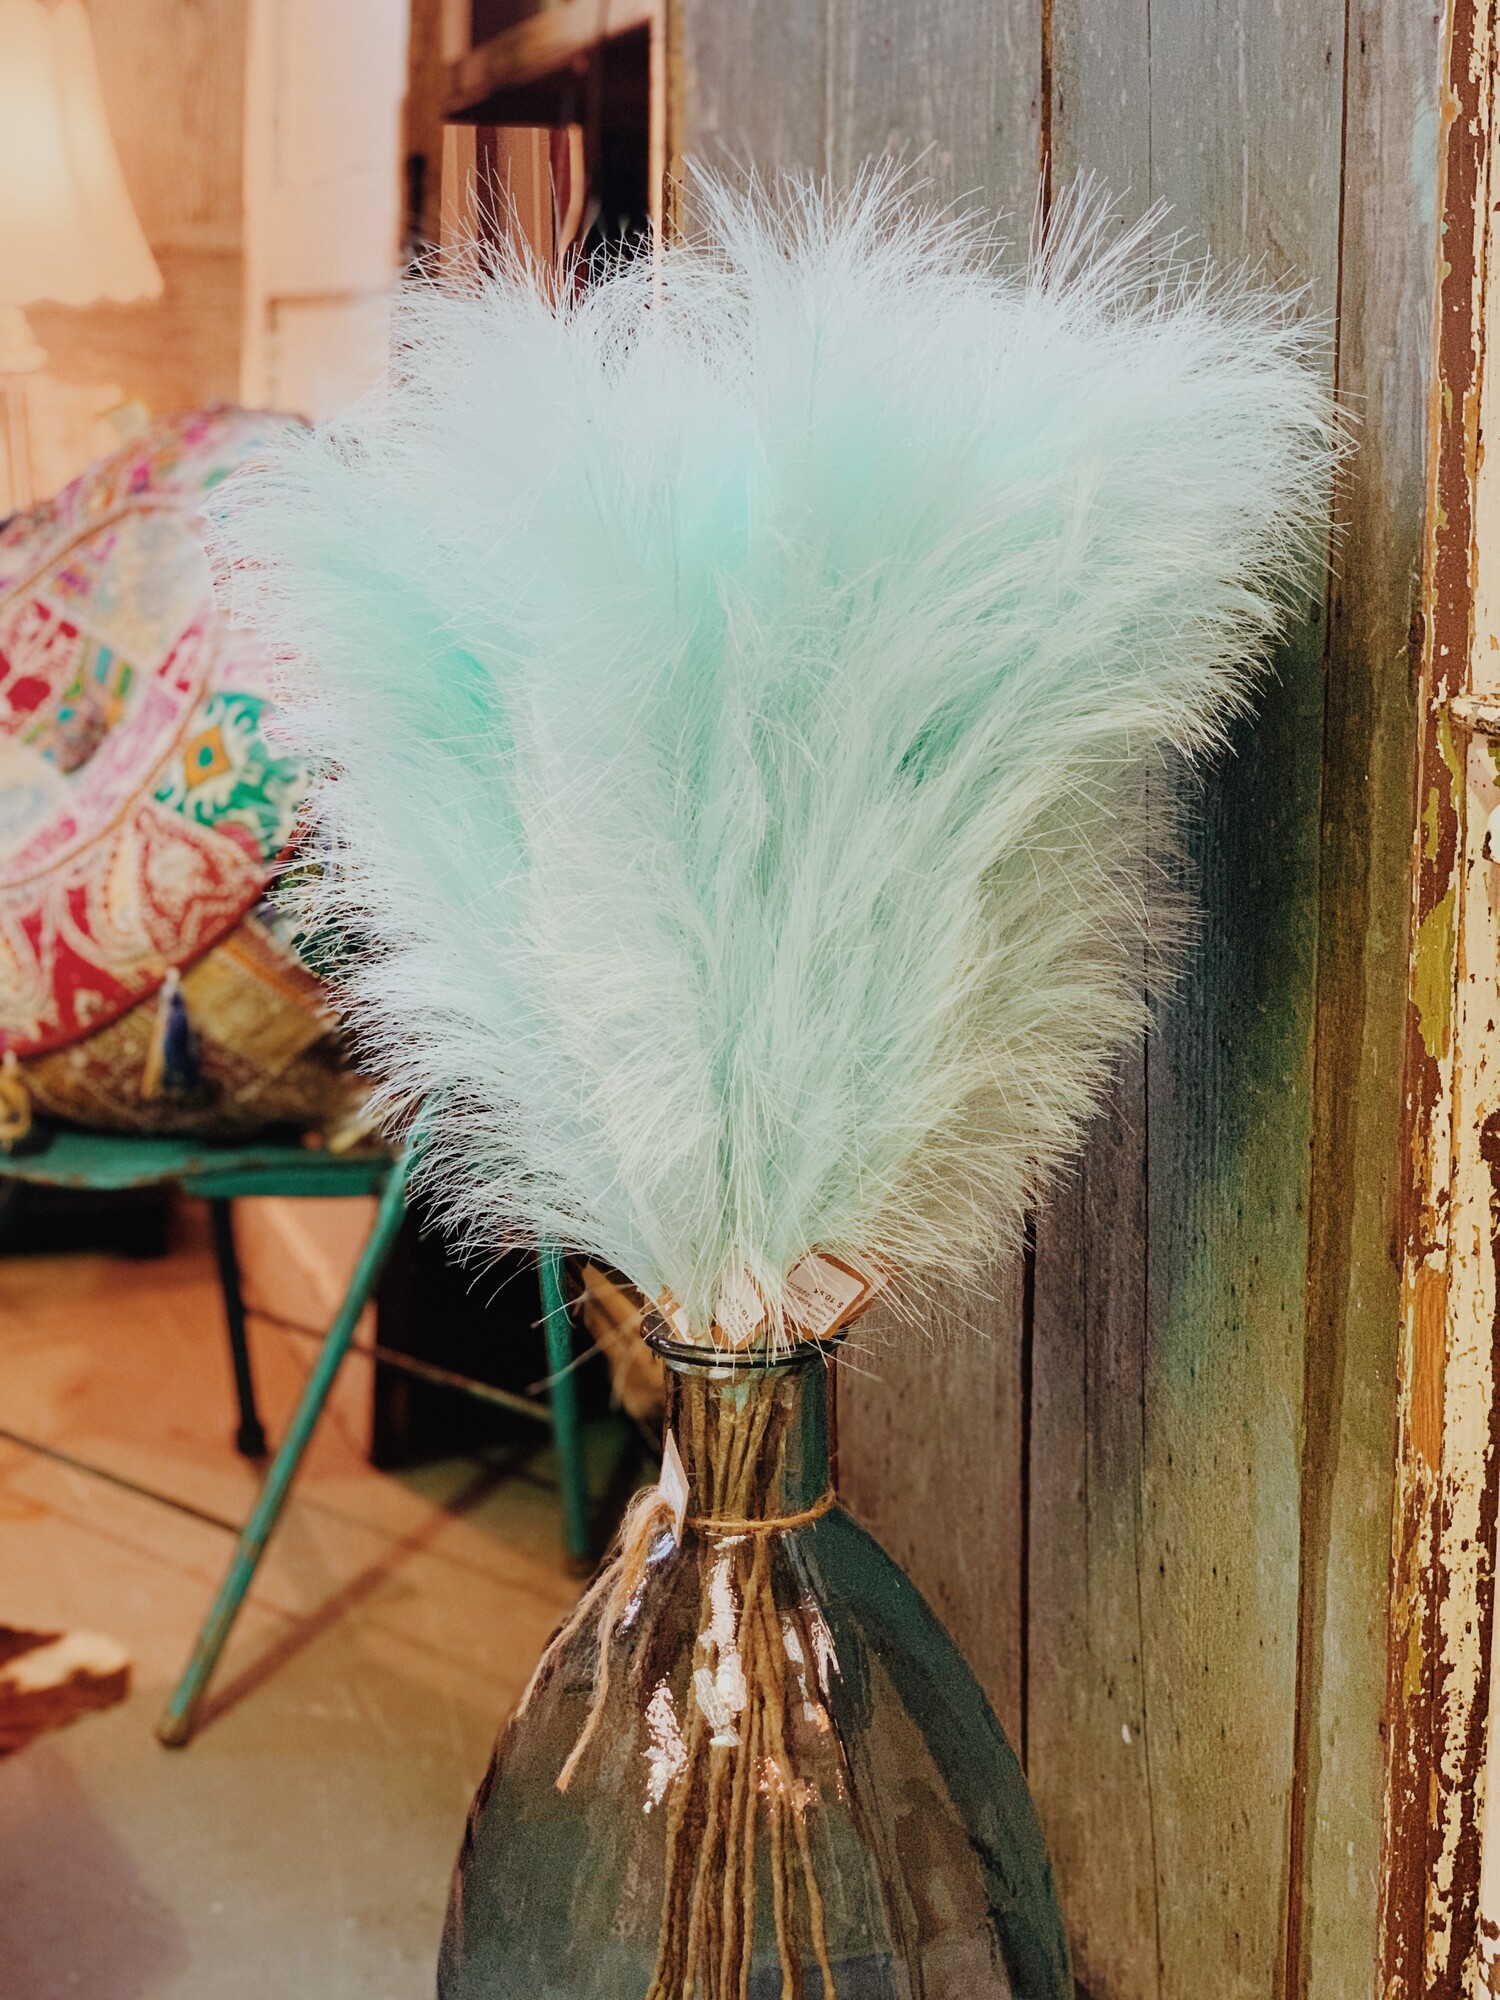 These gorgeous aqua colored pampas stems are perfect for weddings, parties, or even photography! The pastel tone is such a unique pampas color that makes these florals a beautiful touch to any decor! Each stem measures 38 inches long.